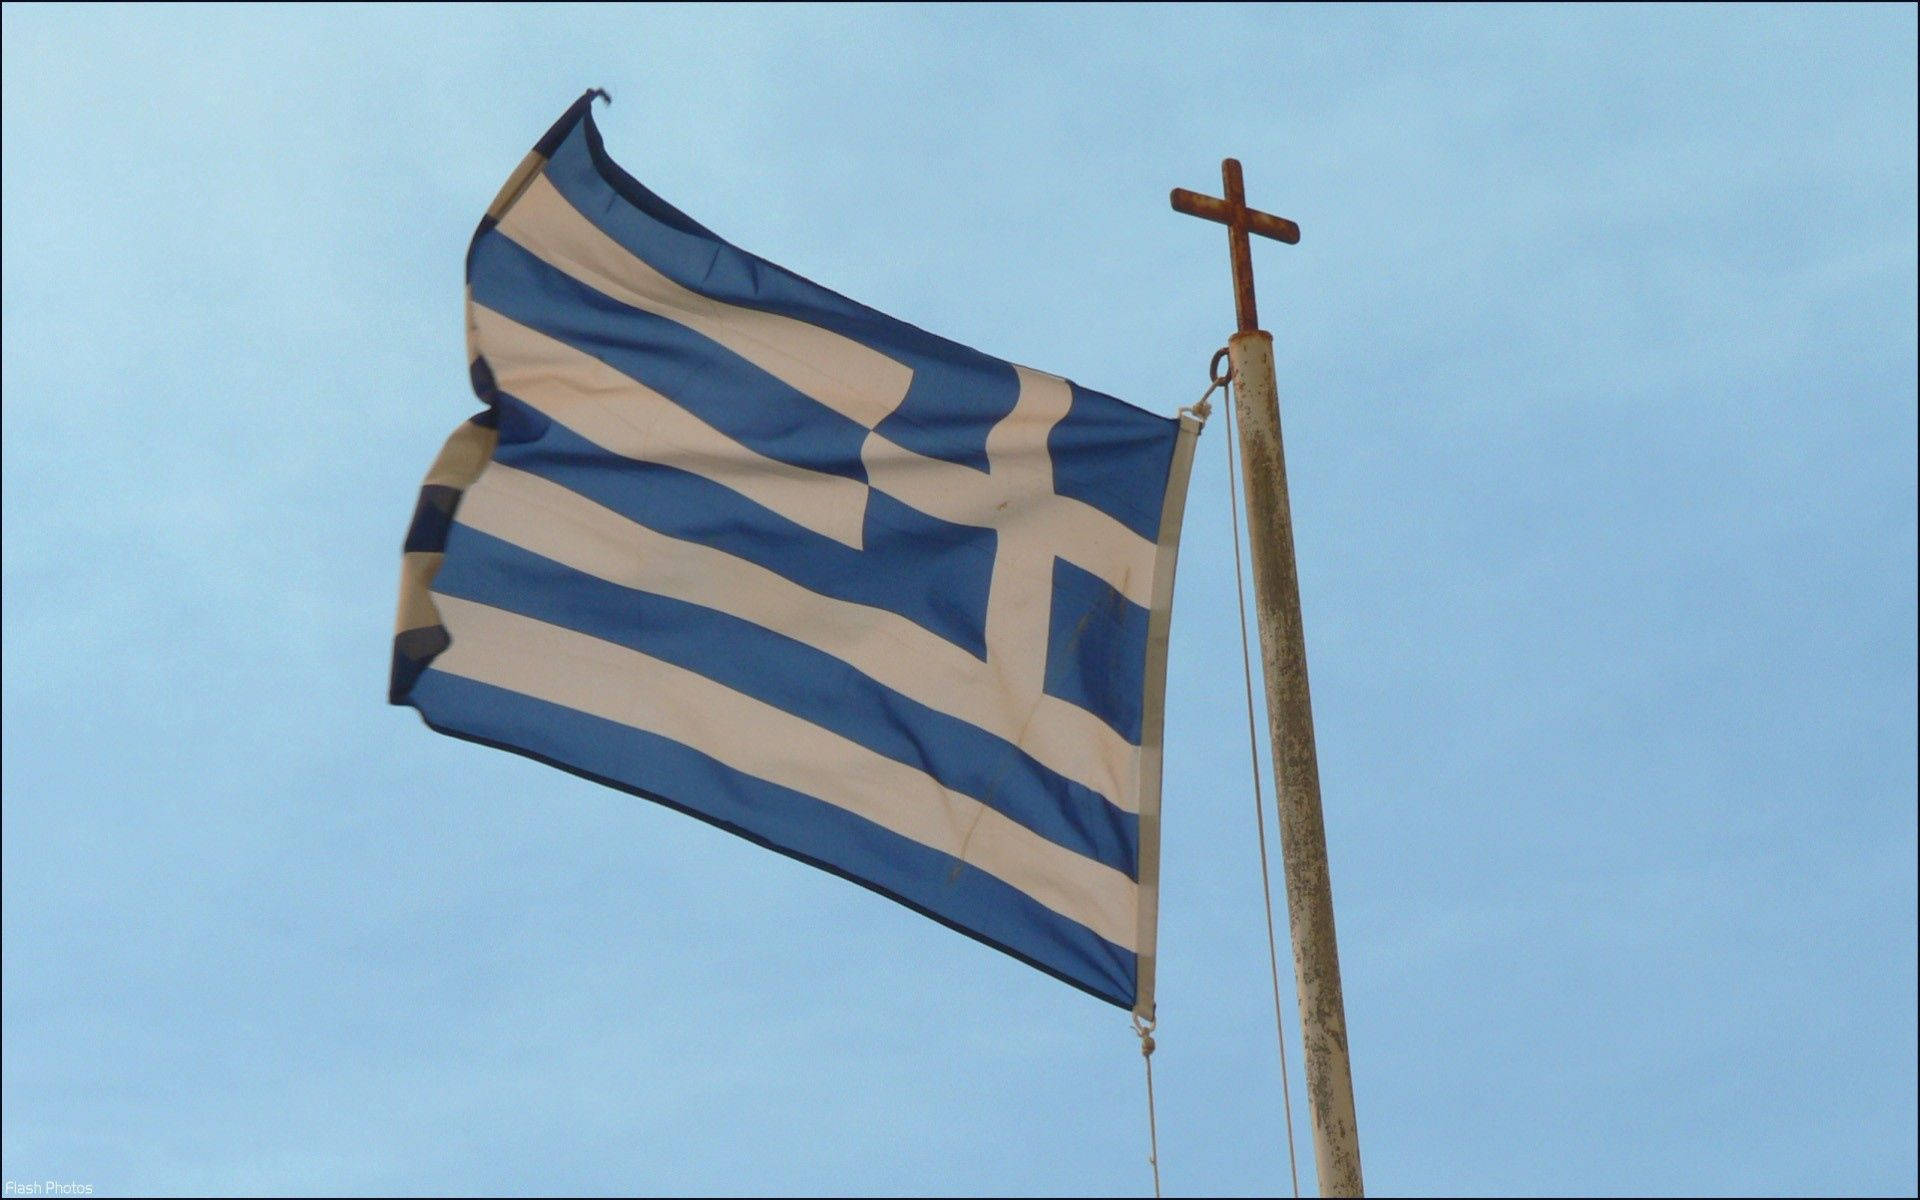 Greece 1920X1200 Wallpaper and Background Image